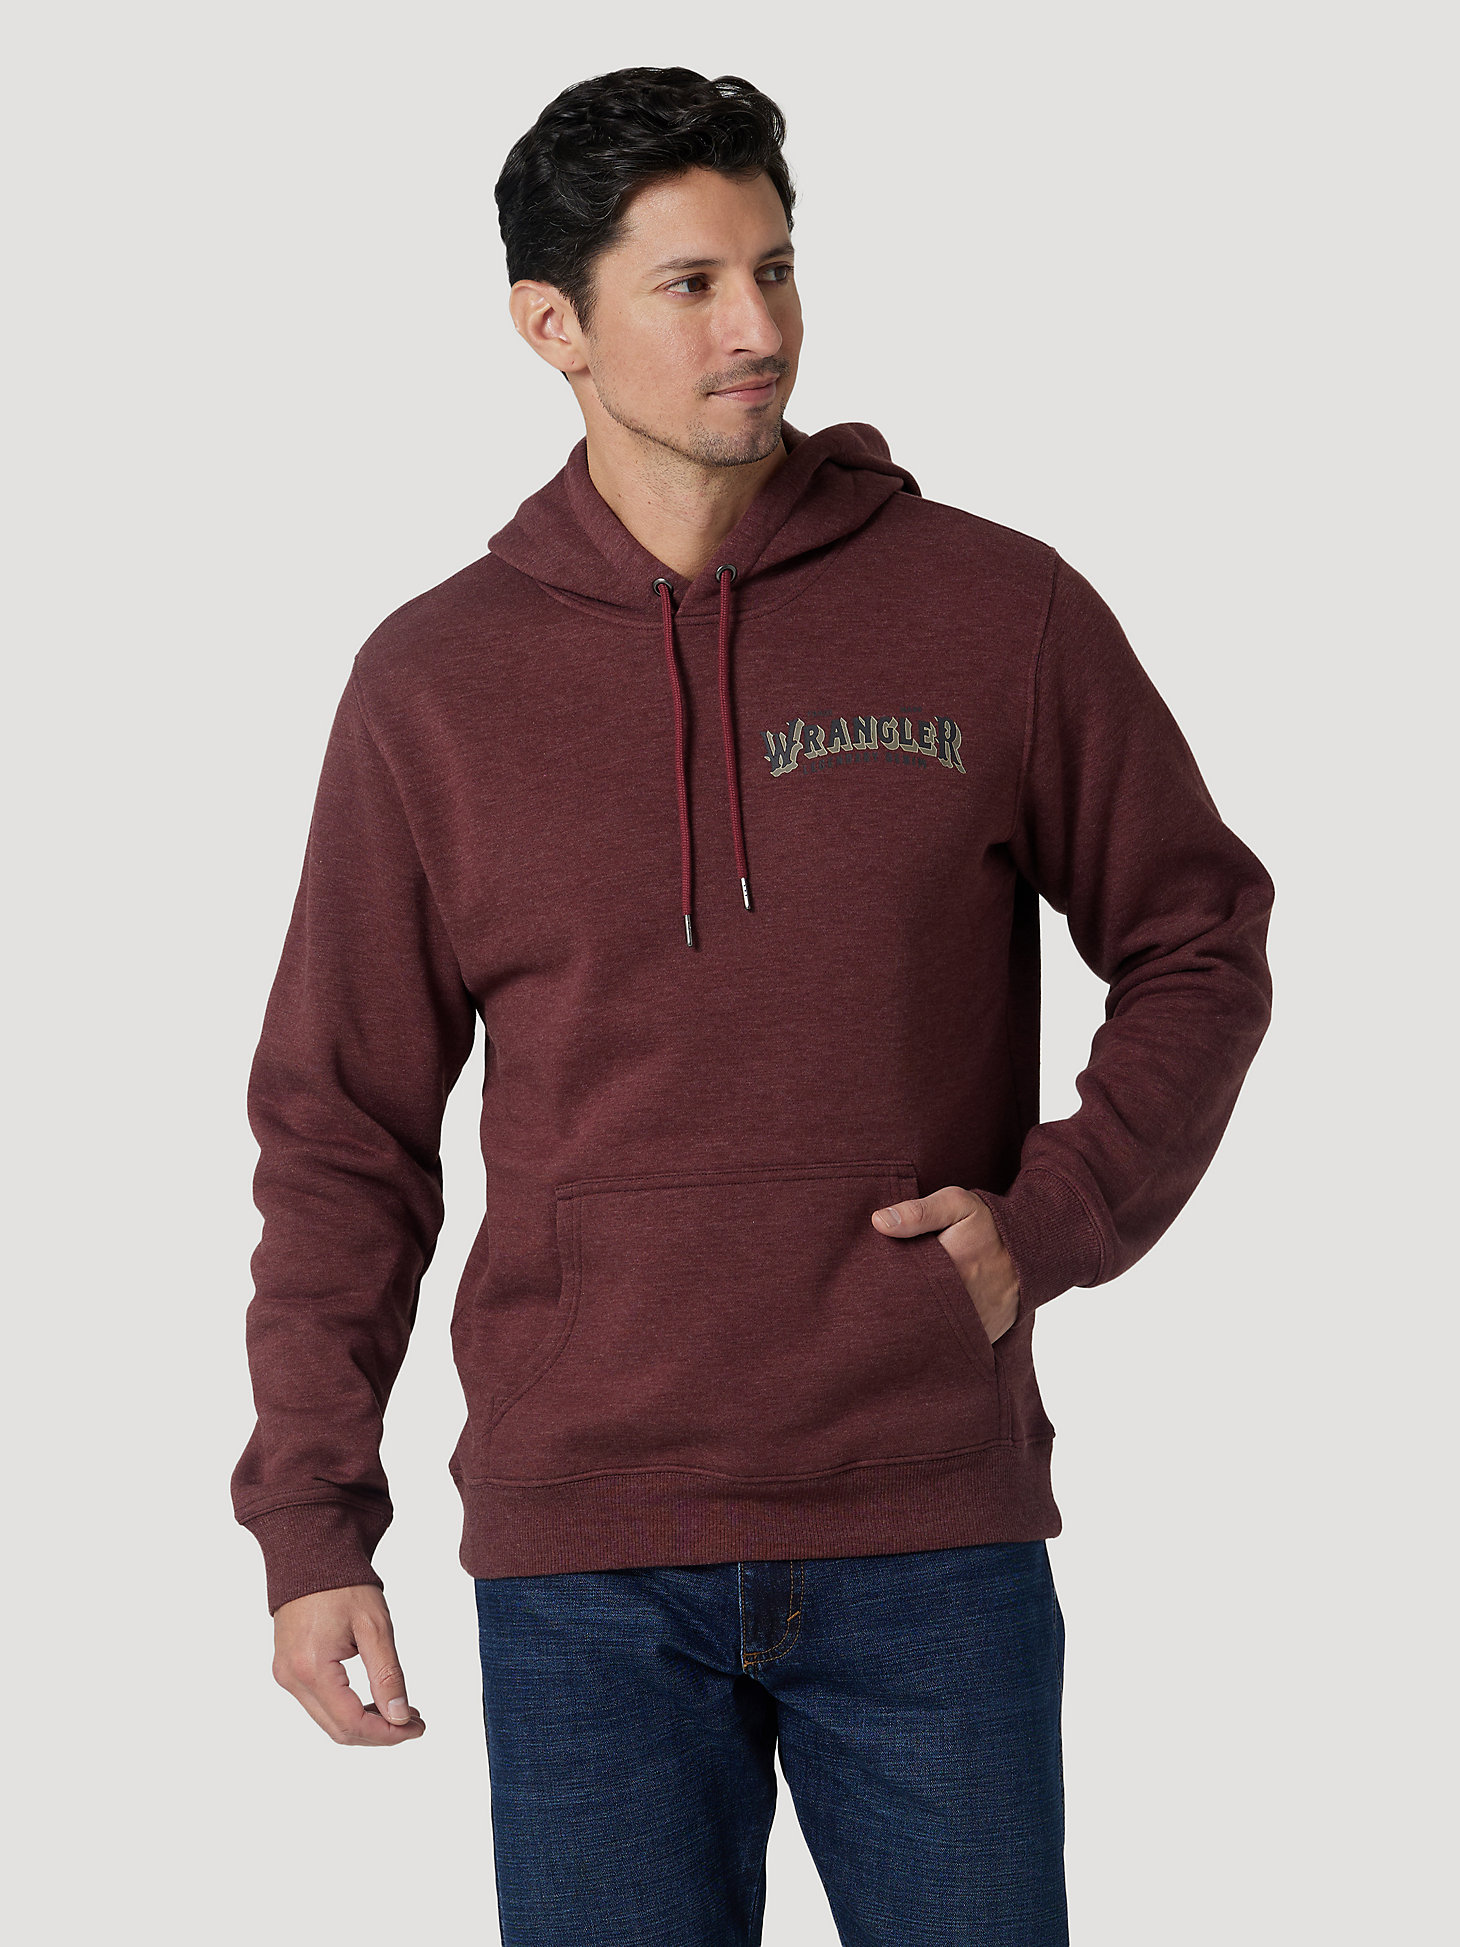 Men's Long Sleeve Authentic Western Buffalo Pullover Hoodie in Burgundy Heather main view